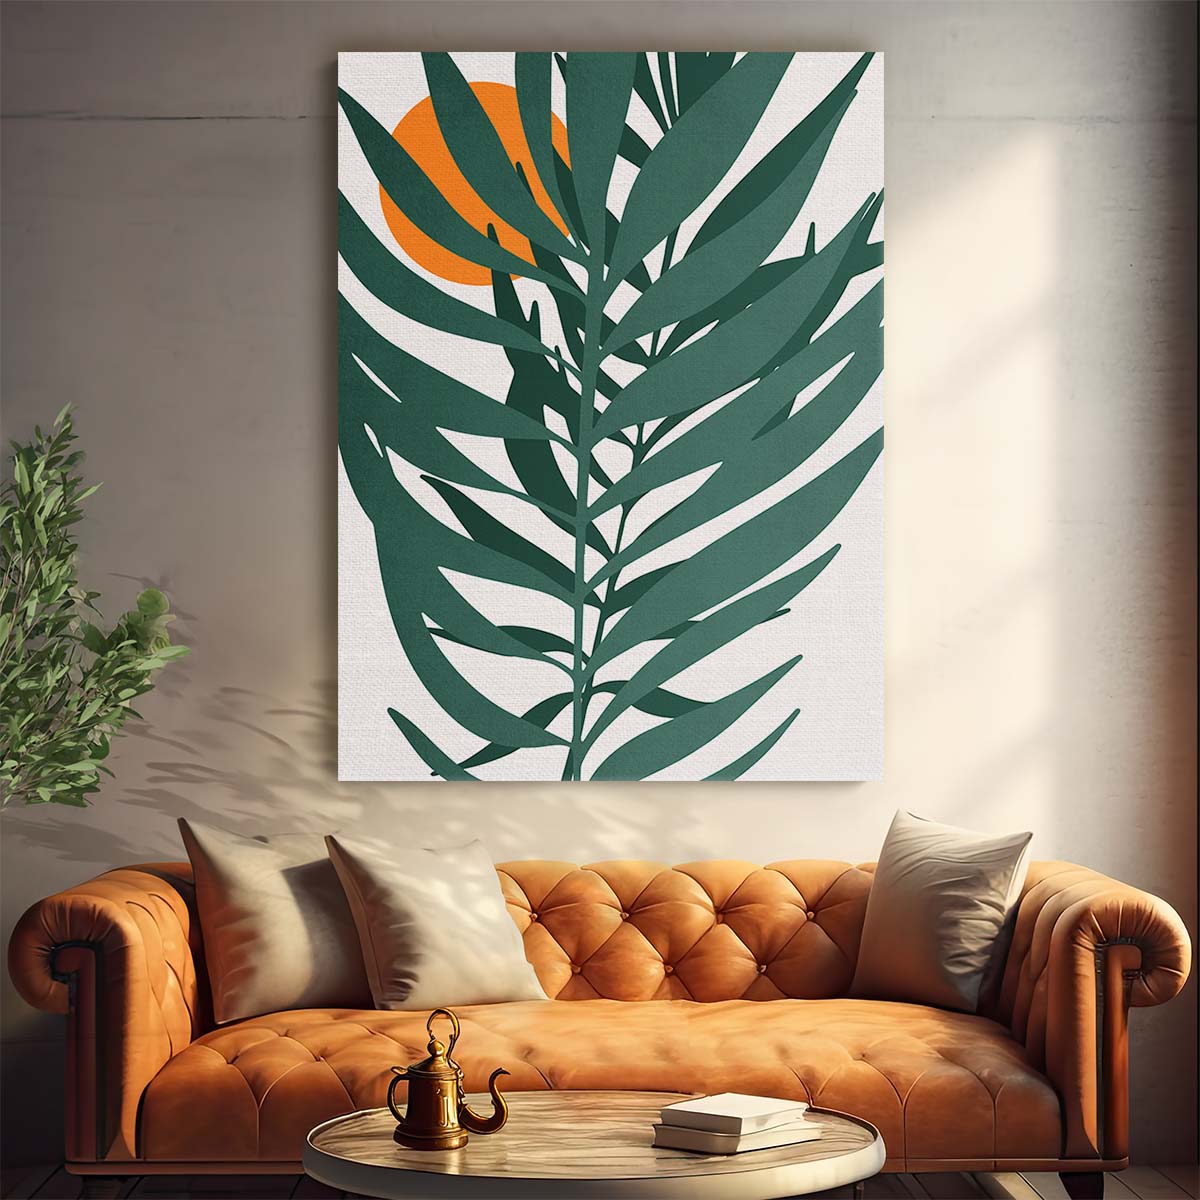 Kubistika's Sunlit Tropical Leaf Illustration, Bright Botanical Wall Art by Luxuriance Designs, made in USA